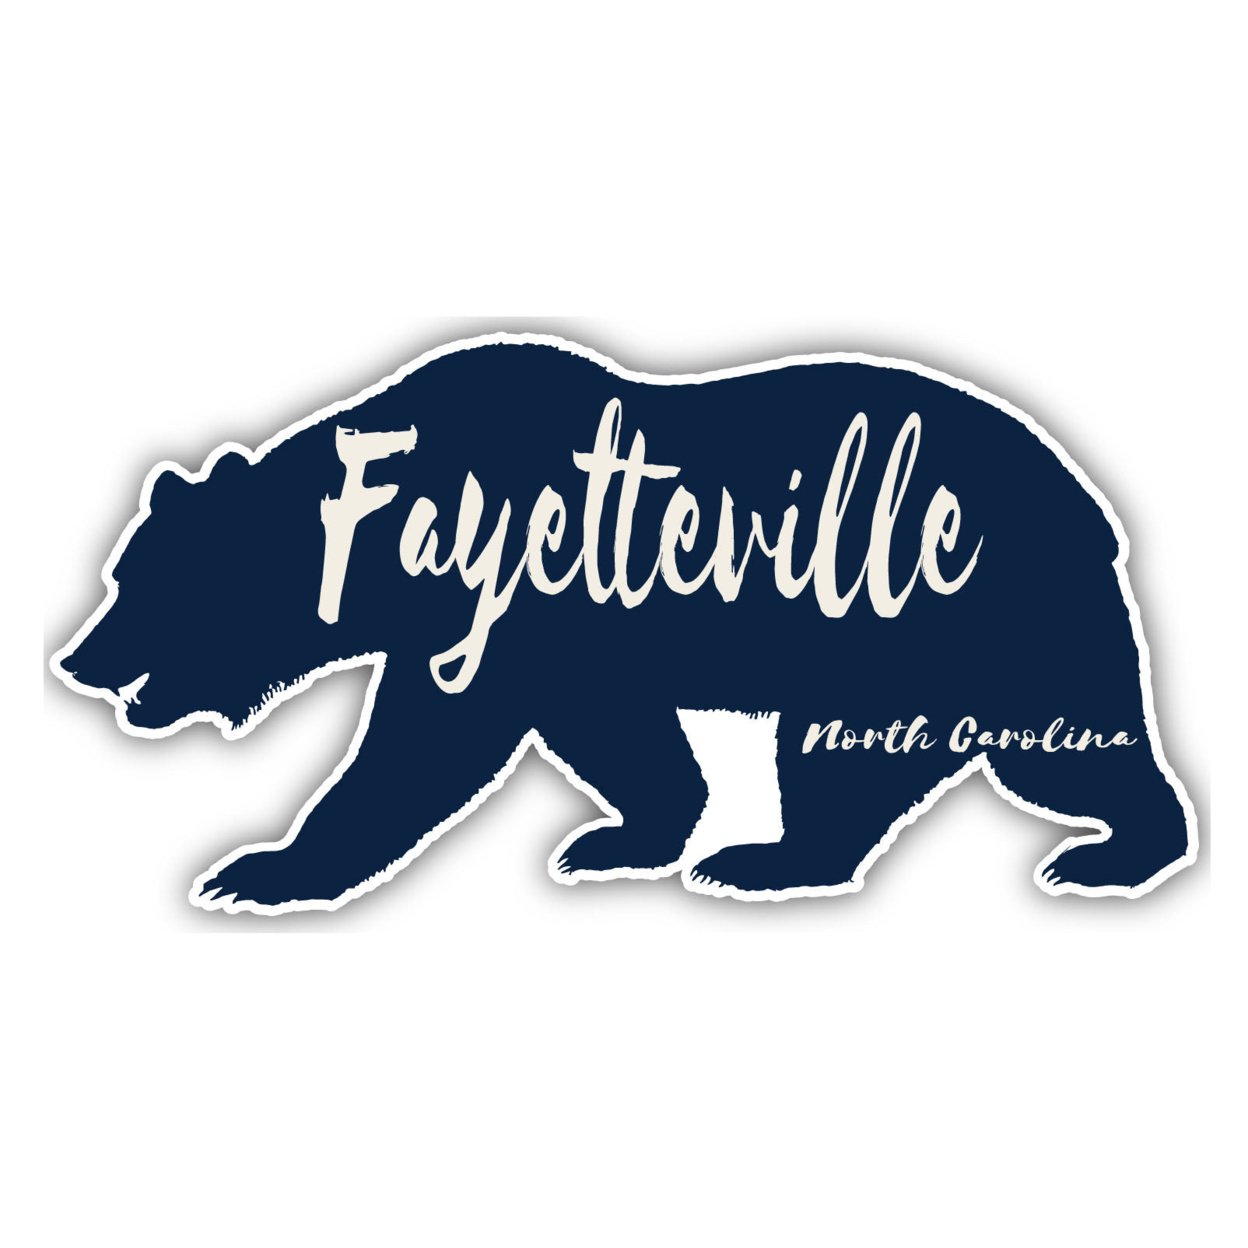 Fayetteville North Carolina Souvenir Decorative Stickers (Choose Theme And Size) - 4-Pack, 4-Inch, Bear